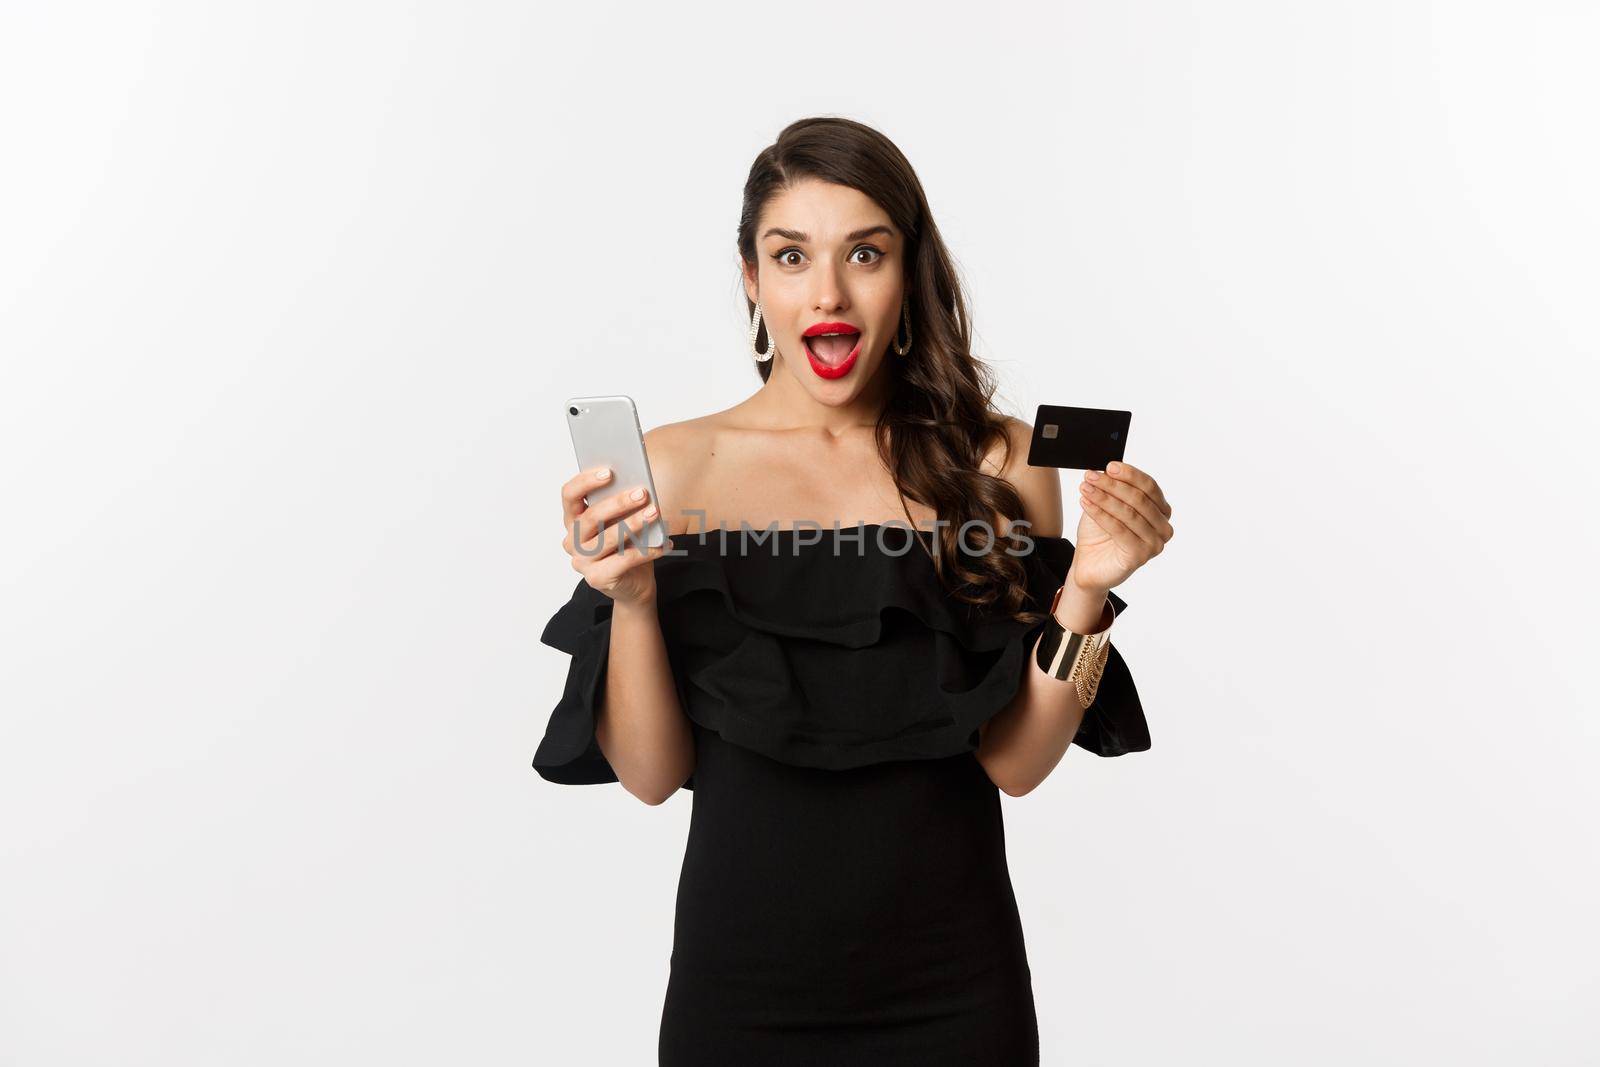 Online shopping concept. Fashionable woman in black dress, holding credit card with smartphone, looking excited, standing over white background.